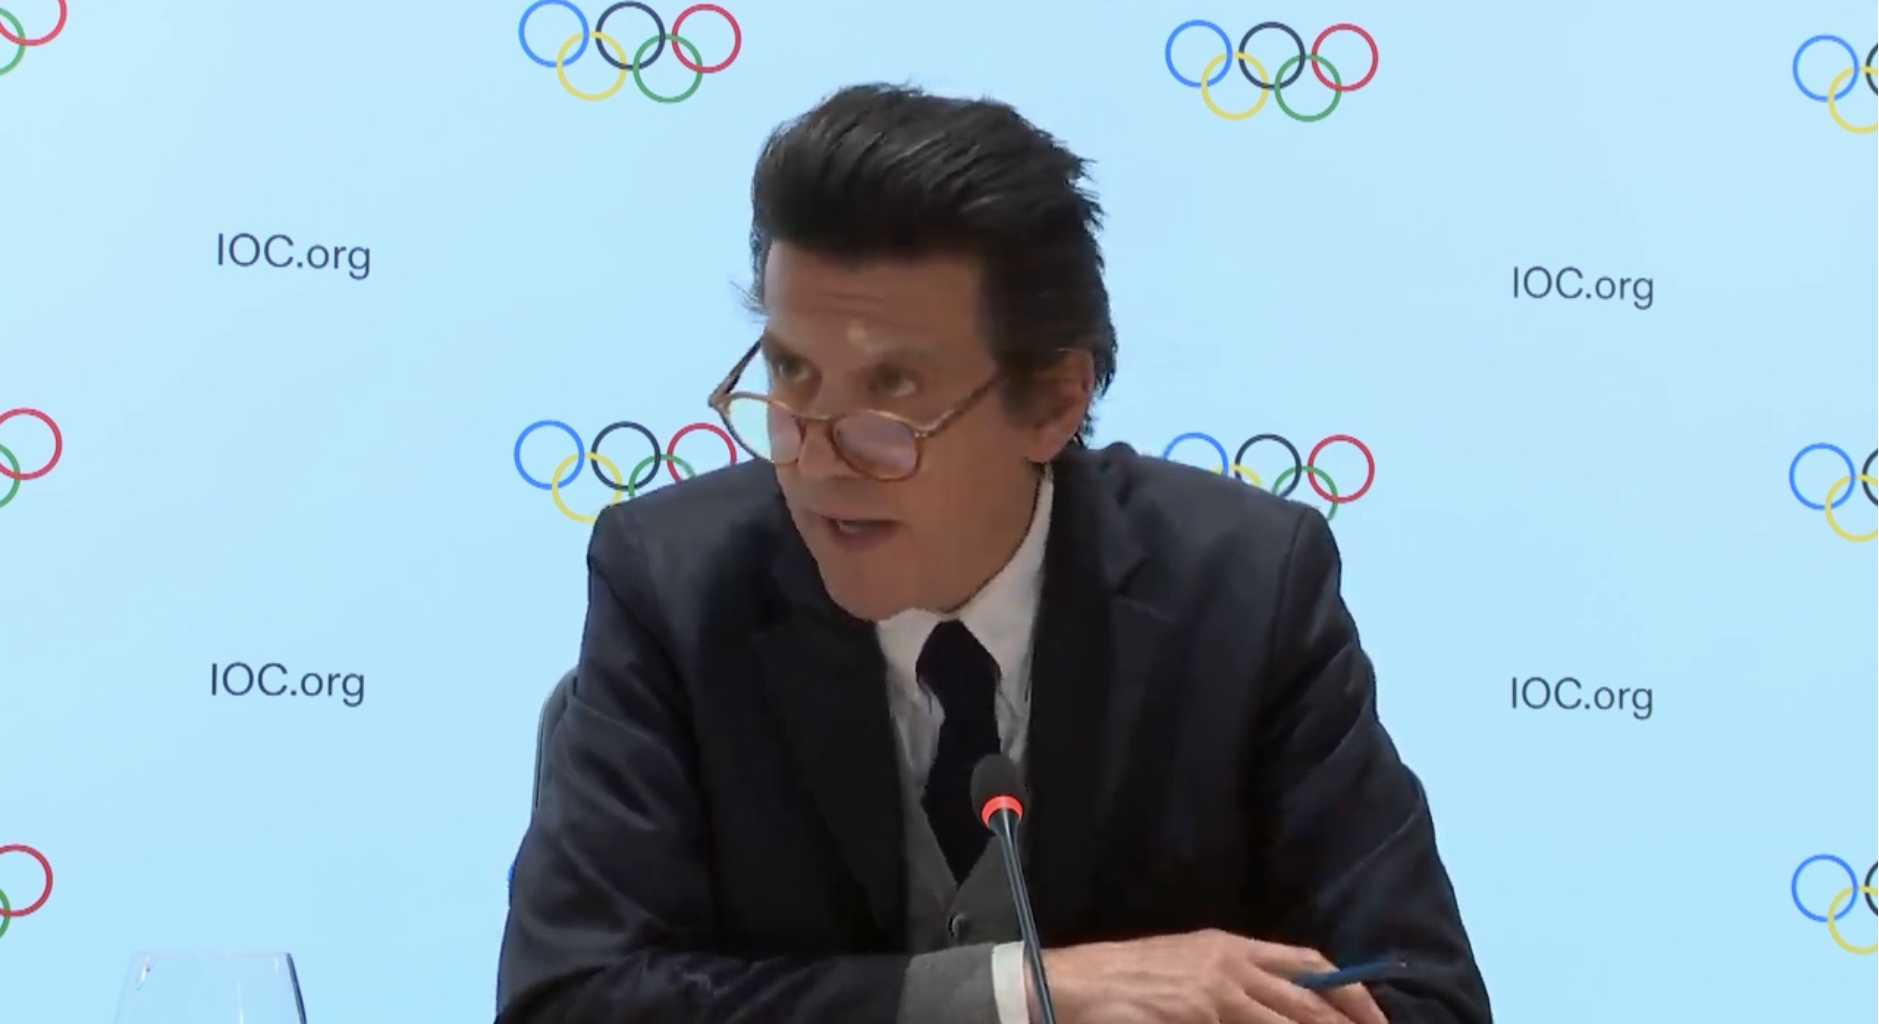 IOC Olympic Games executive director Christophe Dubi revealed a new timetable for choosing a host city for the 2030 Winter Olympic Games ©ITG